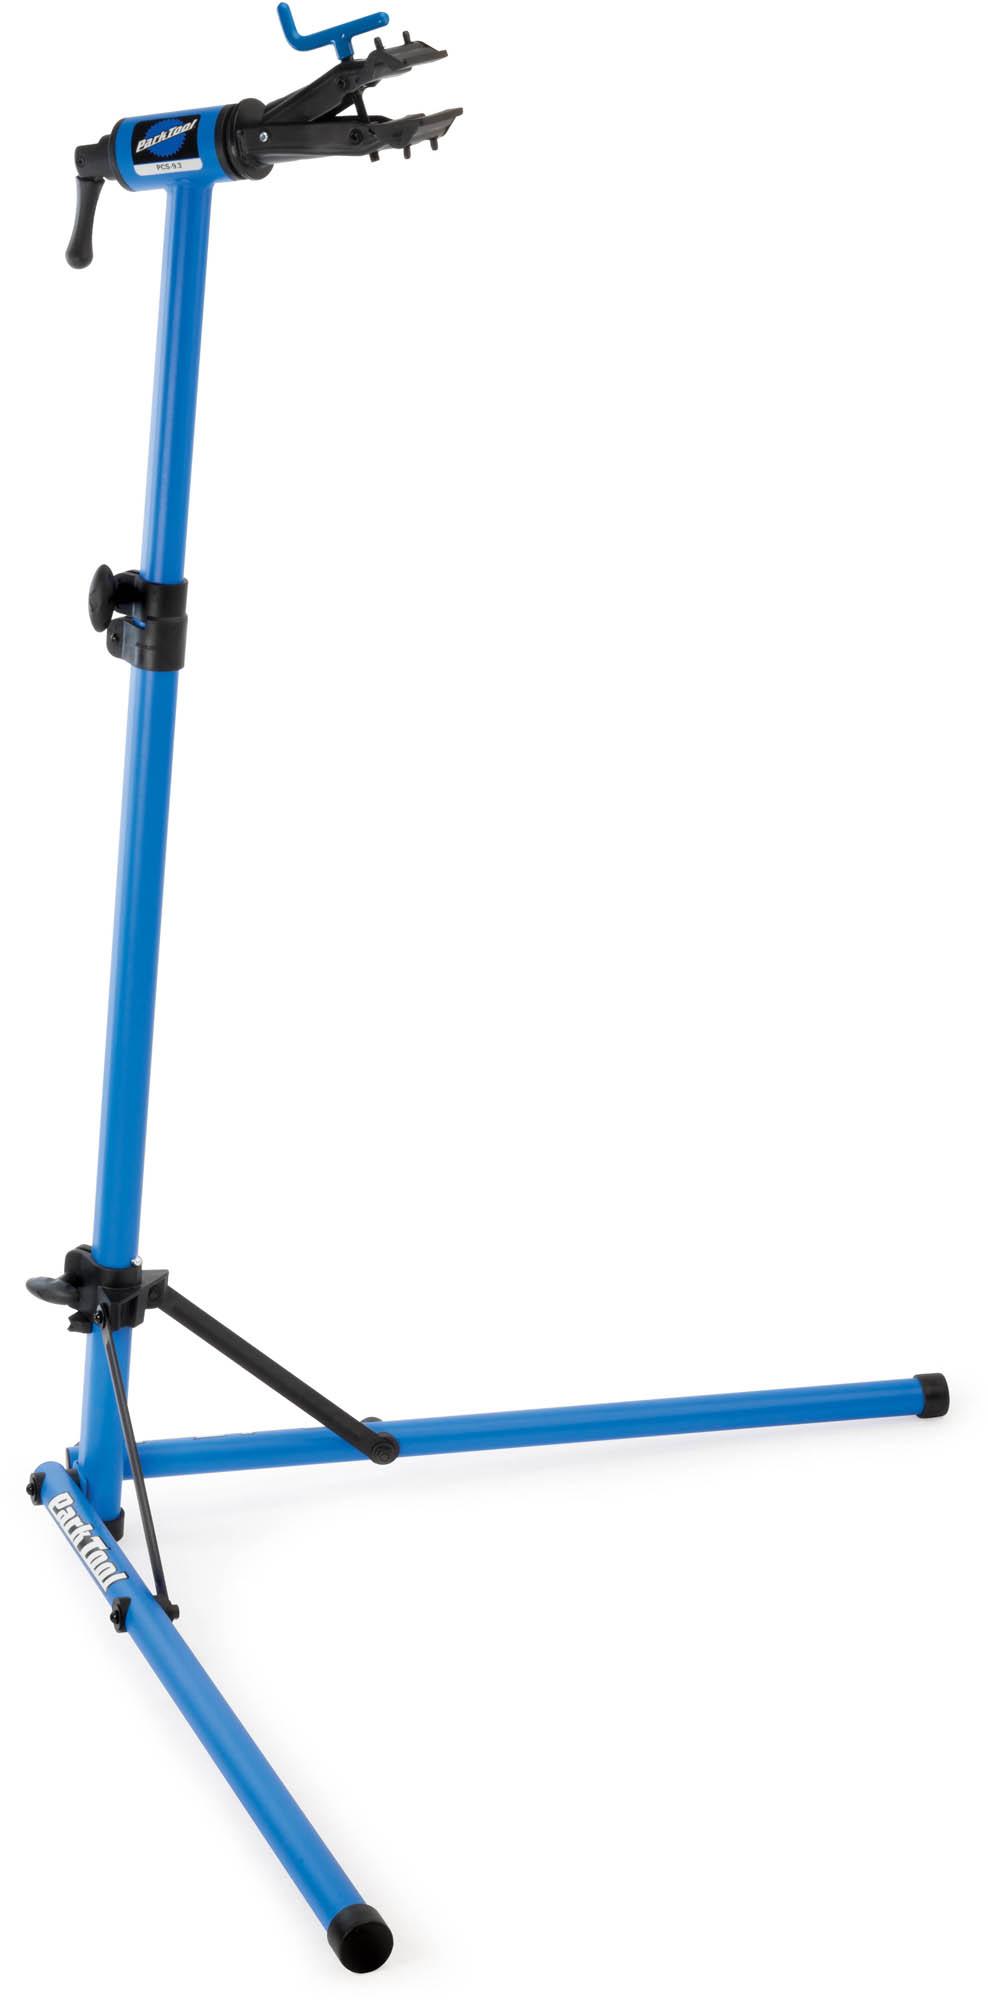 Image of Park Tool PCS-9.3 Home Mechanic Workstand, Blue